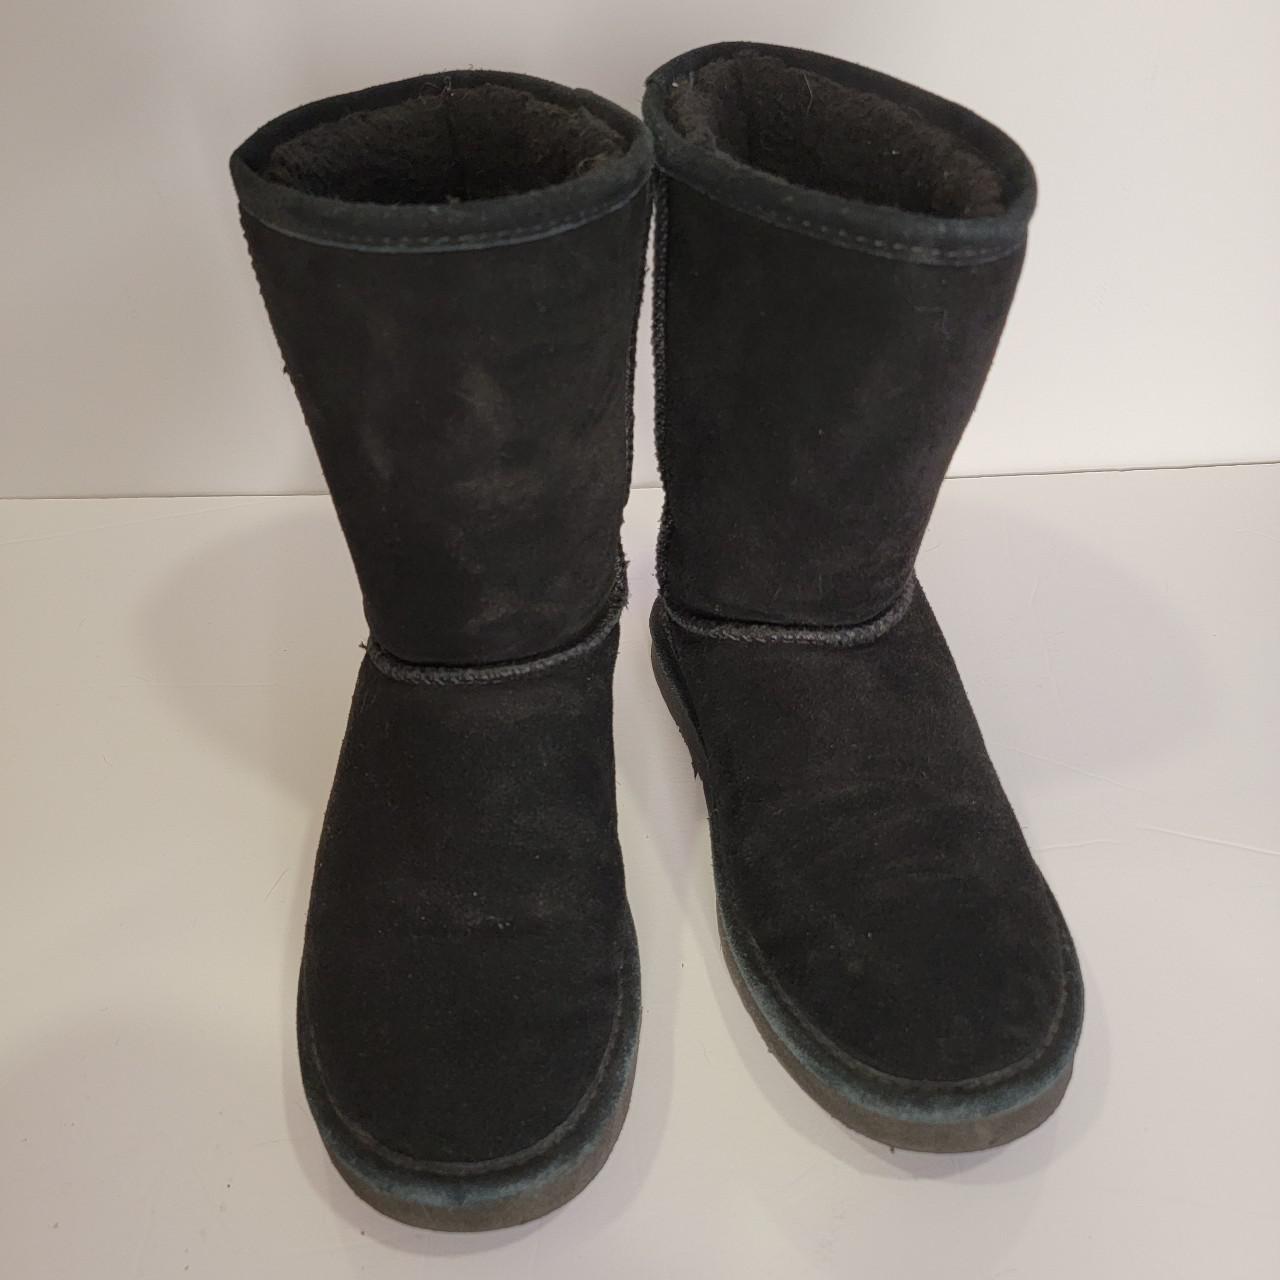 Black Bearpaw Boots! These are great for this year's... - Depop